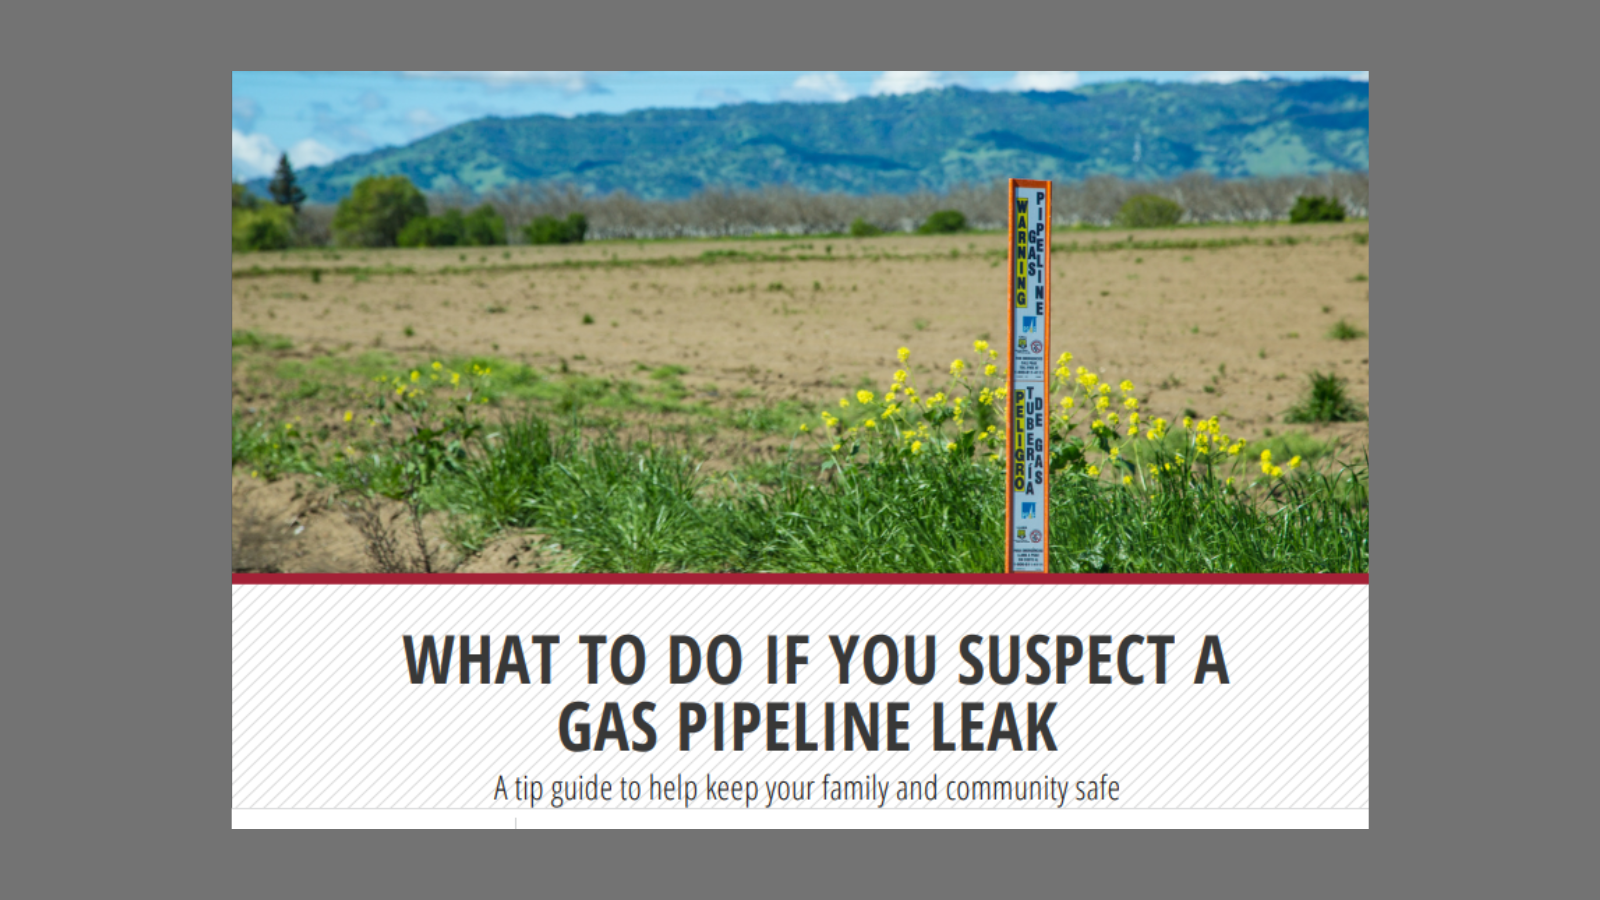 What to do if you suspect a gas leak